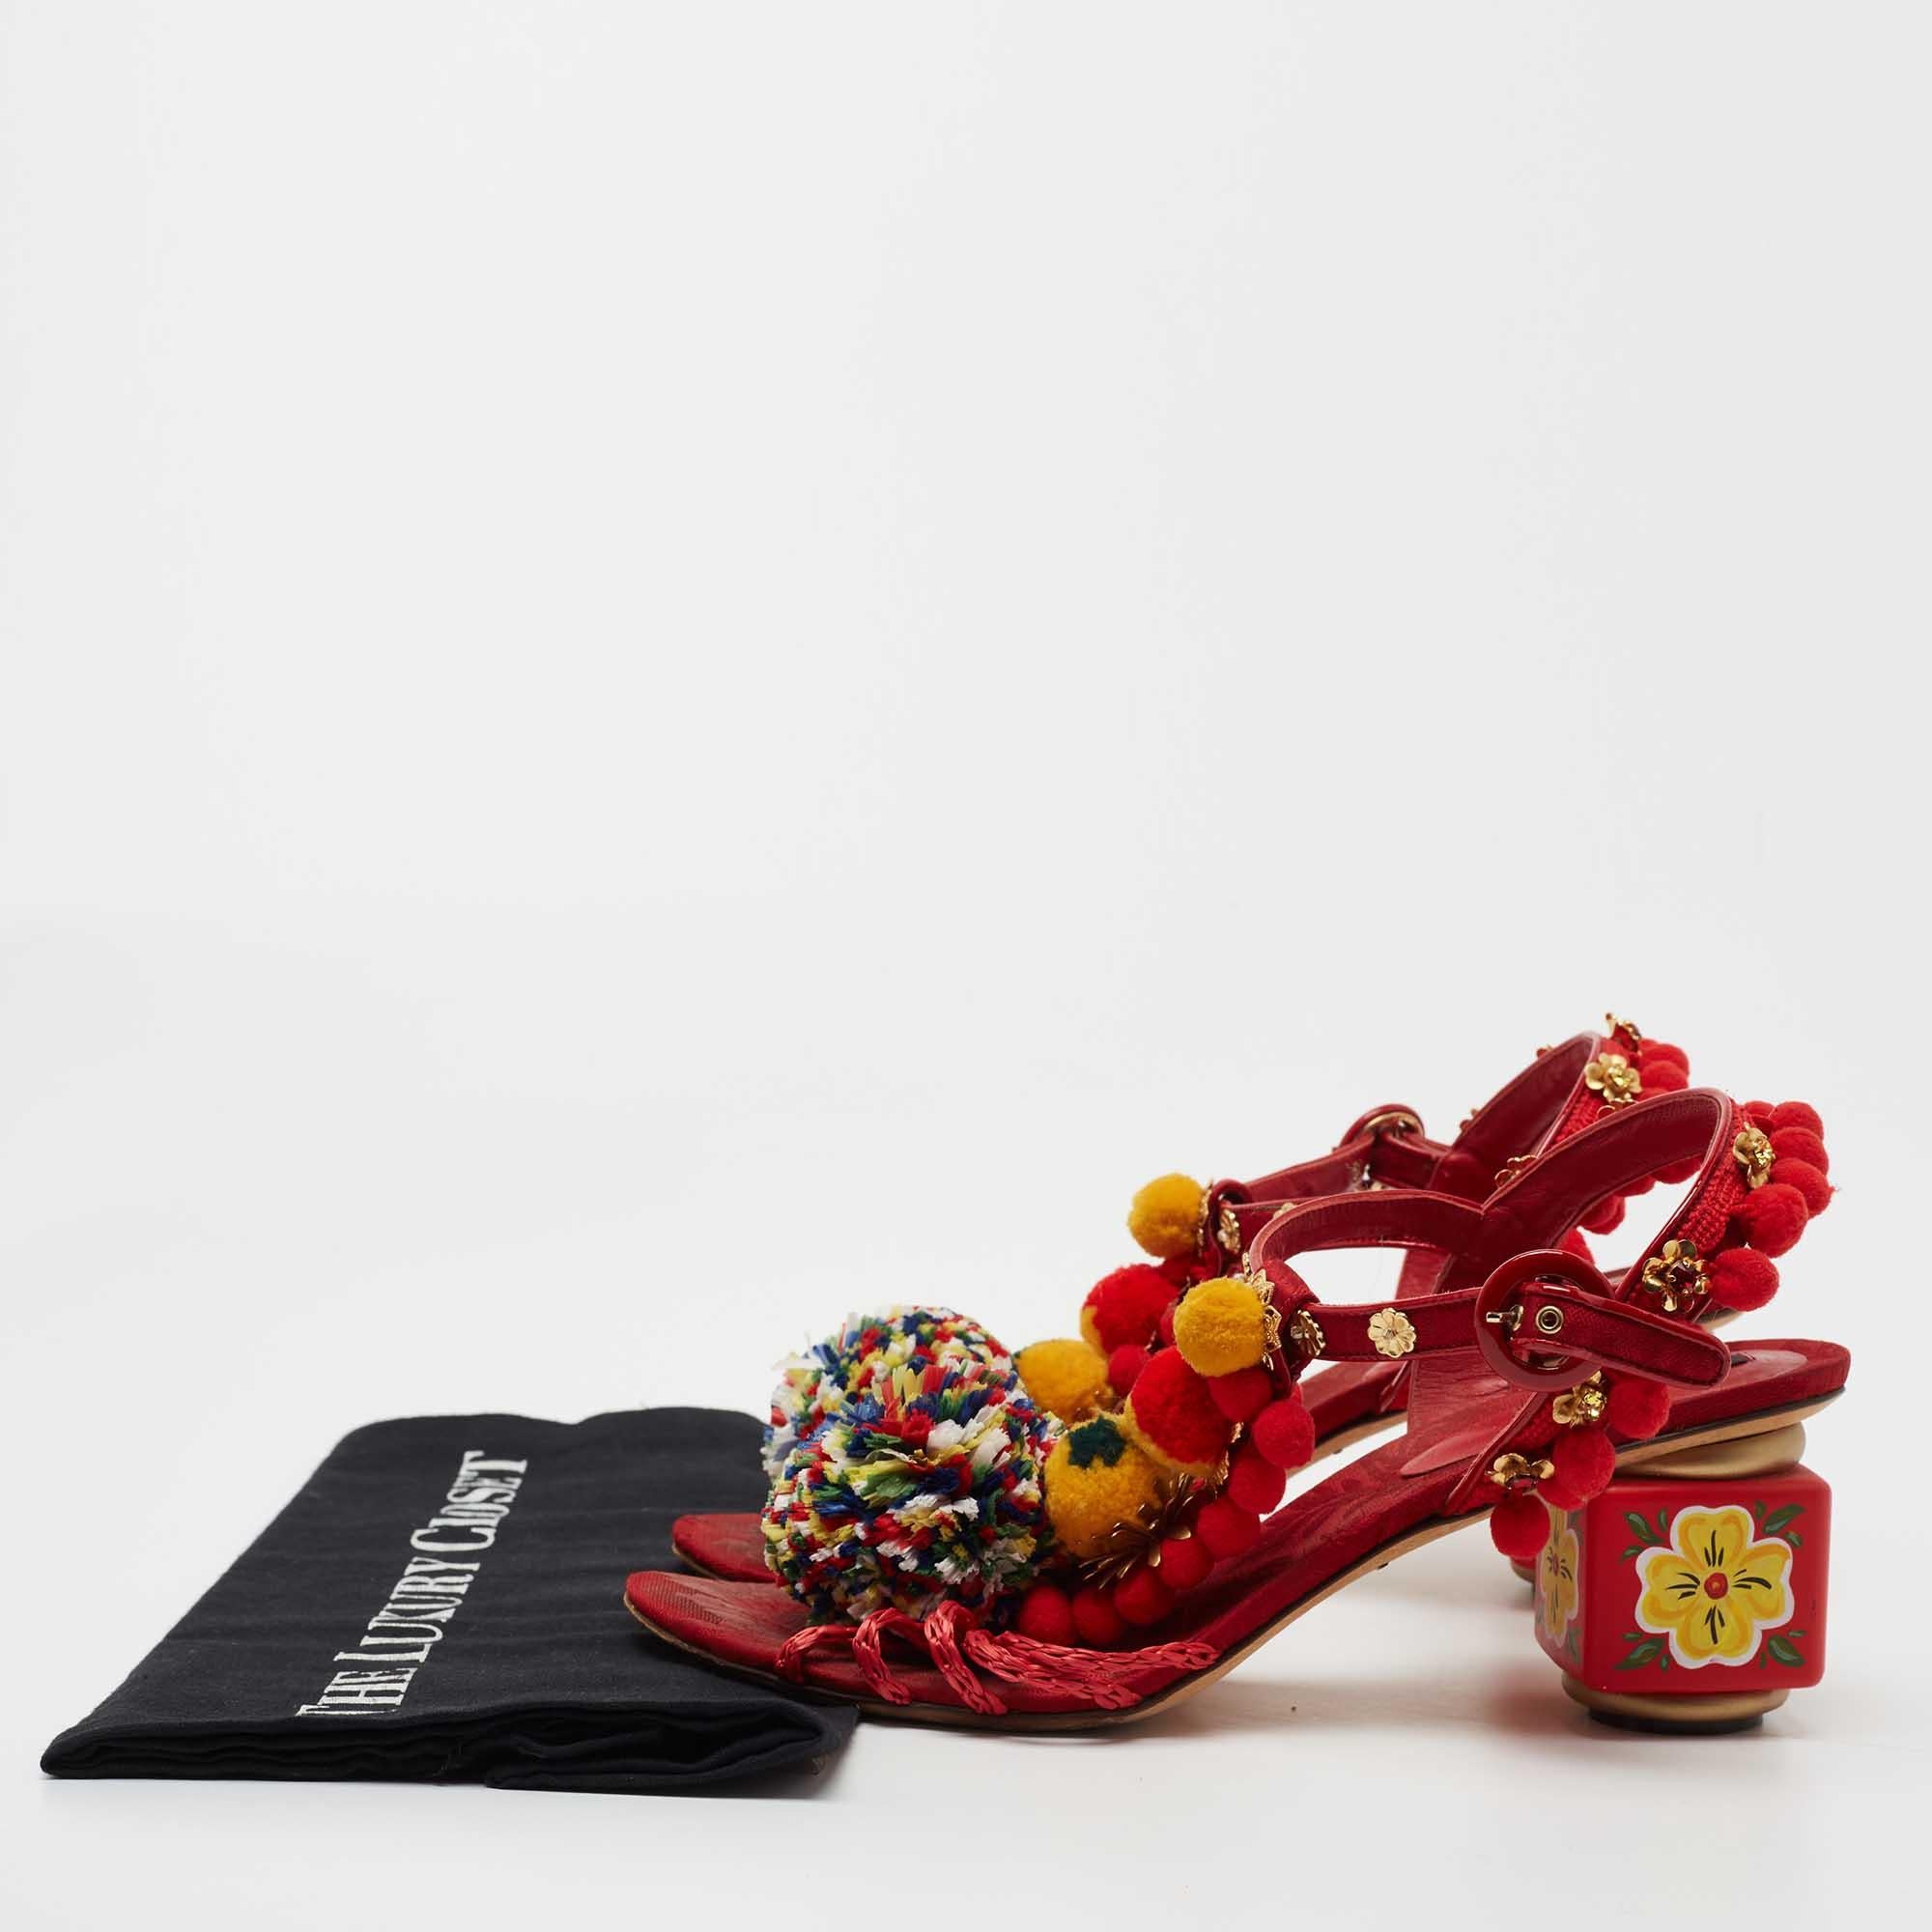 Dolce & Gabbana Multicolor Leather and Fabric Pom Pom Sandals Size 39 4